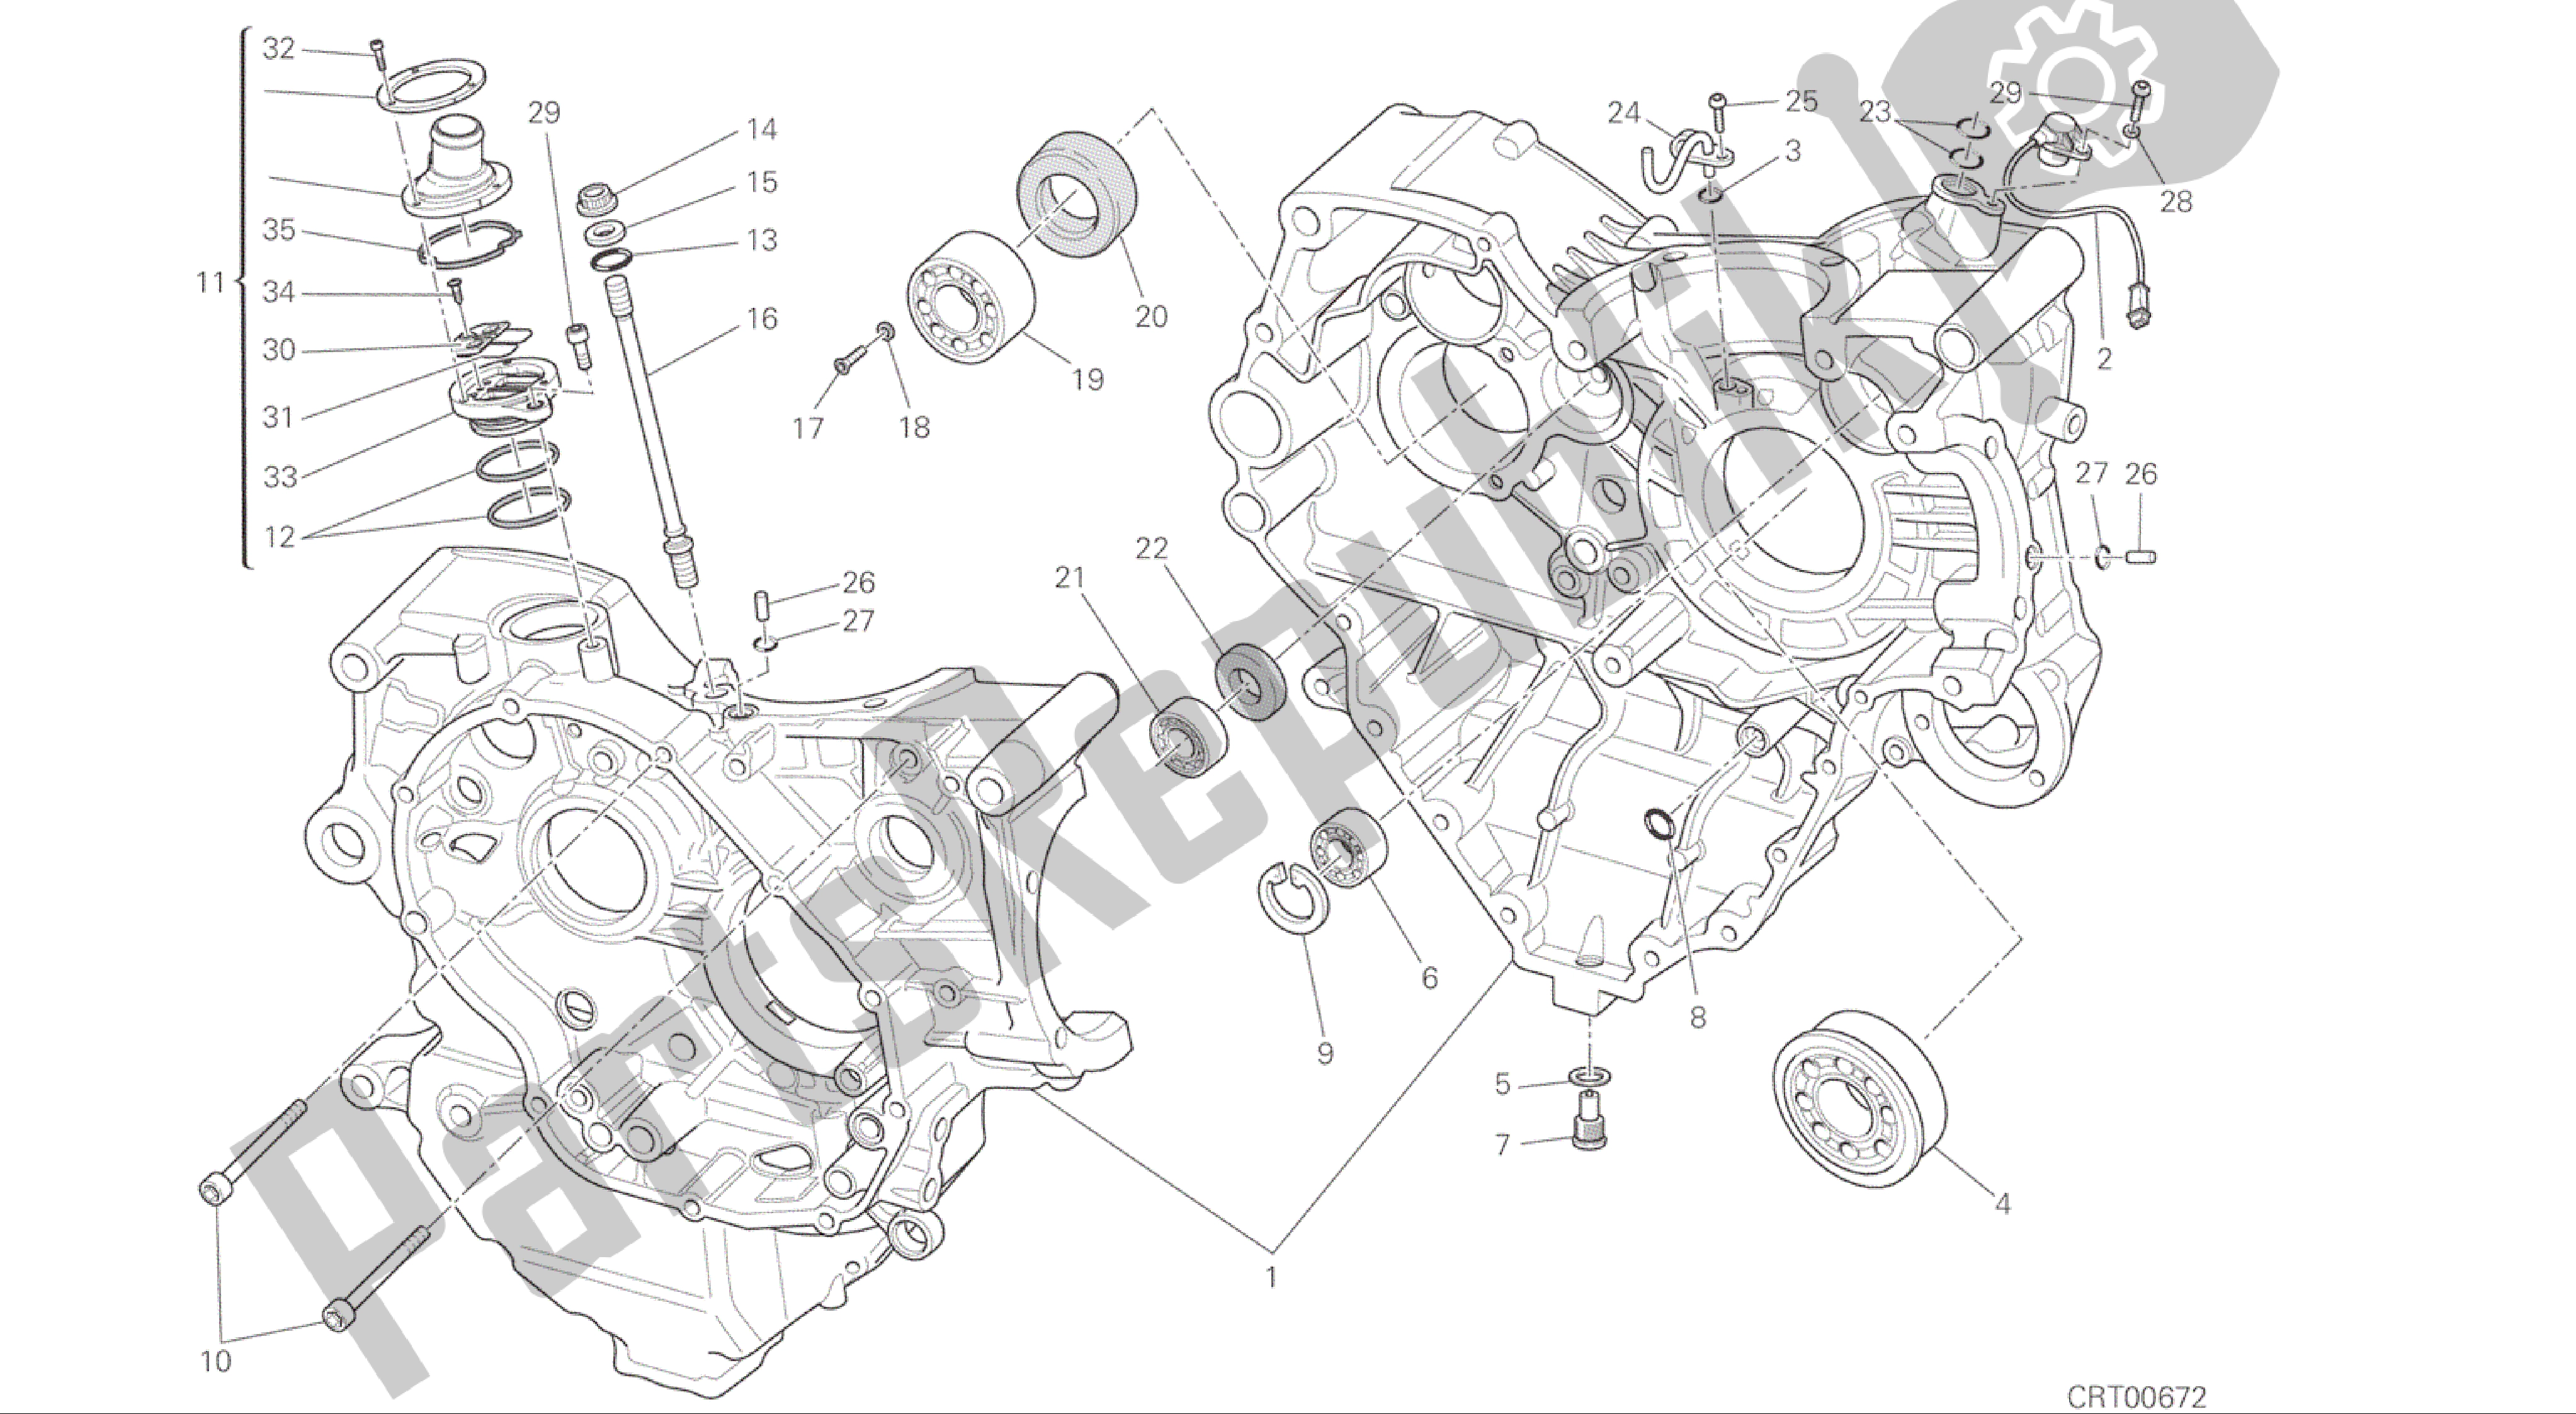 All parts for the Drawing 010 - Crankcase [mod:f848]group Engine of the Ducati Streetfighter 848 2015